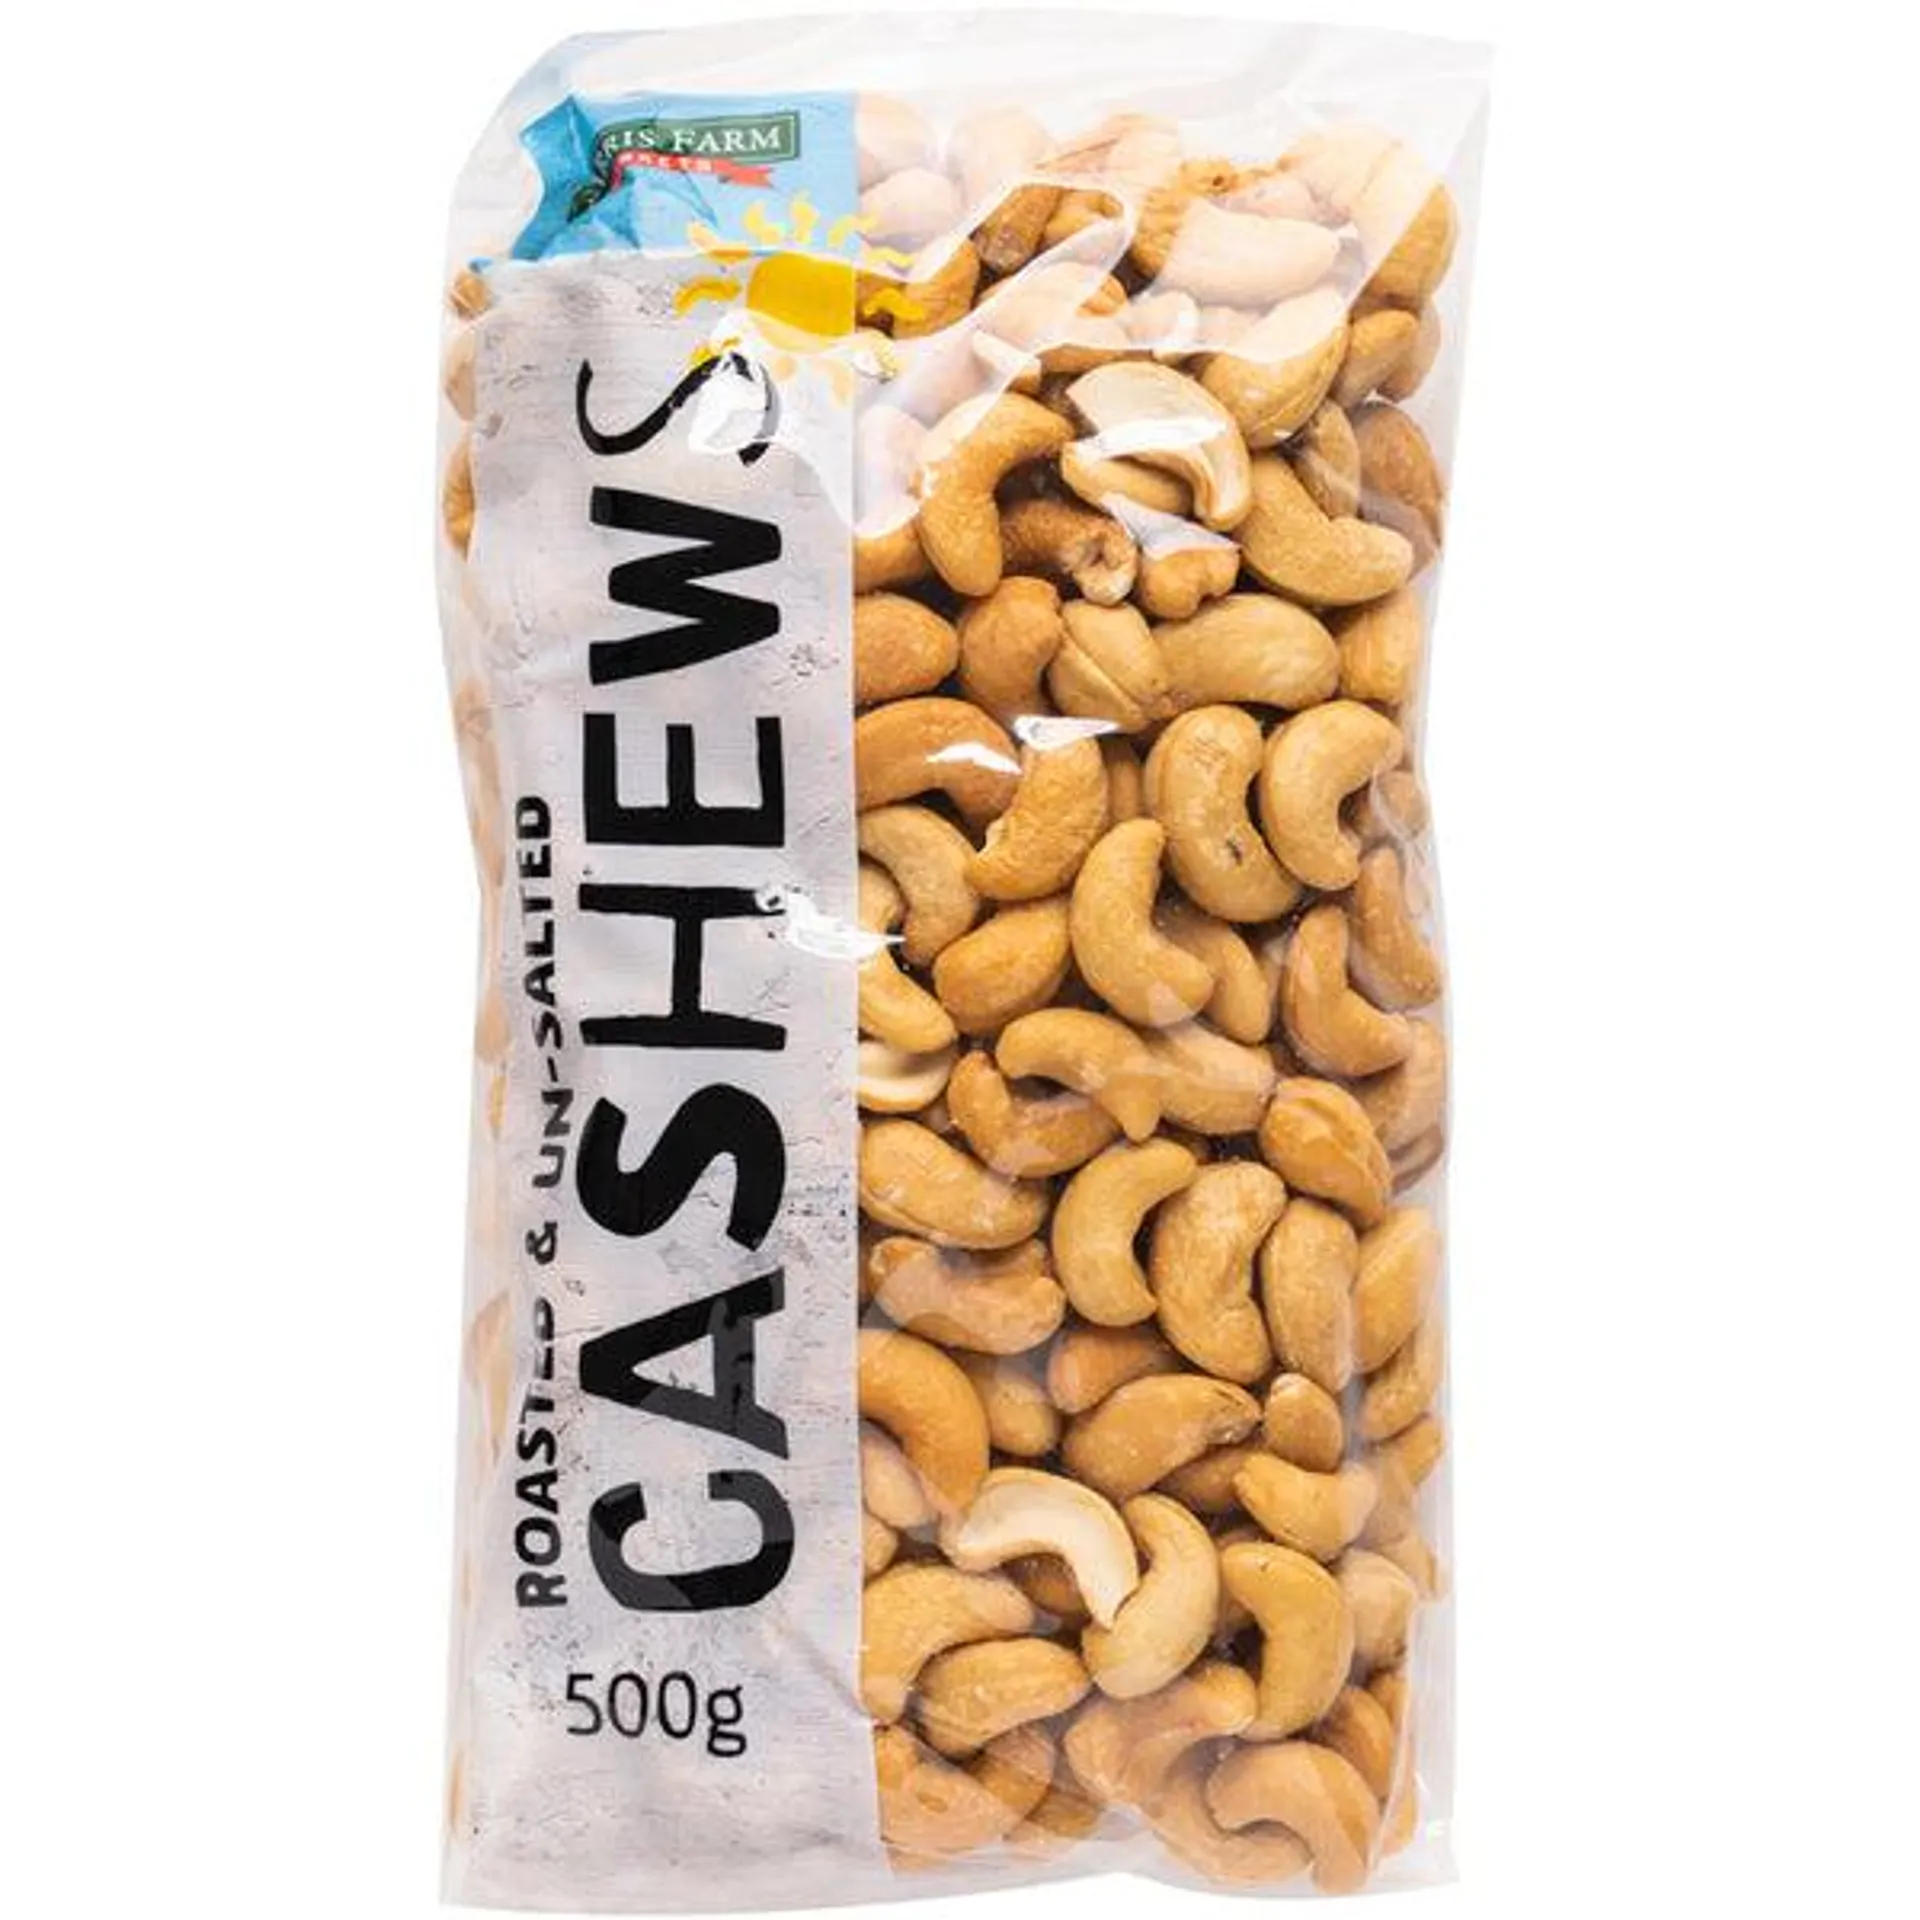 Harris Farm Cashews Roasted and Unsalted 500g